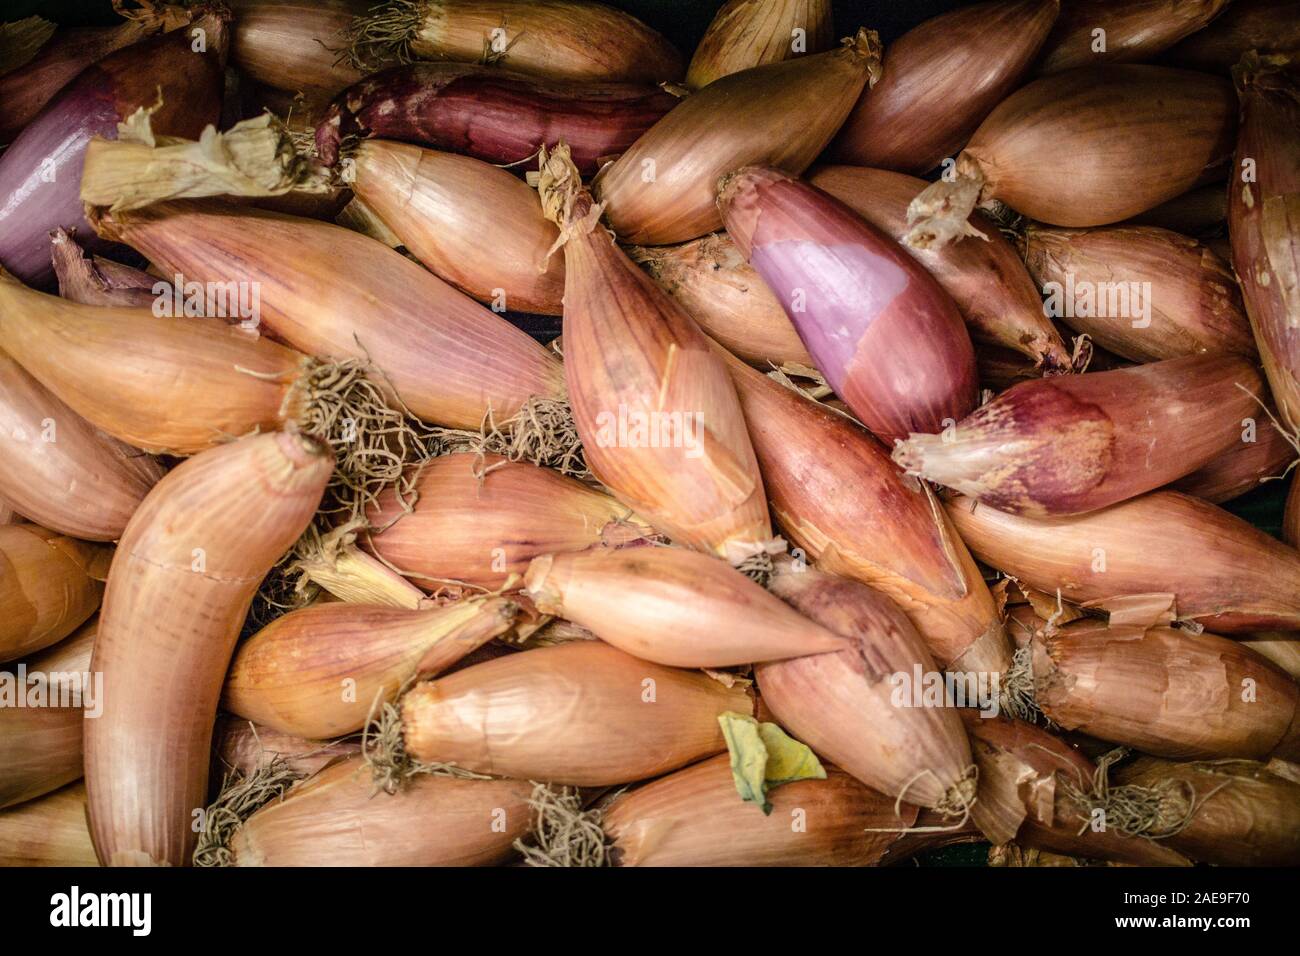 2,843 Banana Shallot Royalty-Free Images, Stock Photos & Pictures